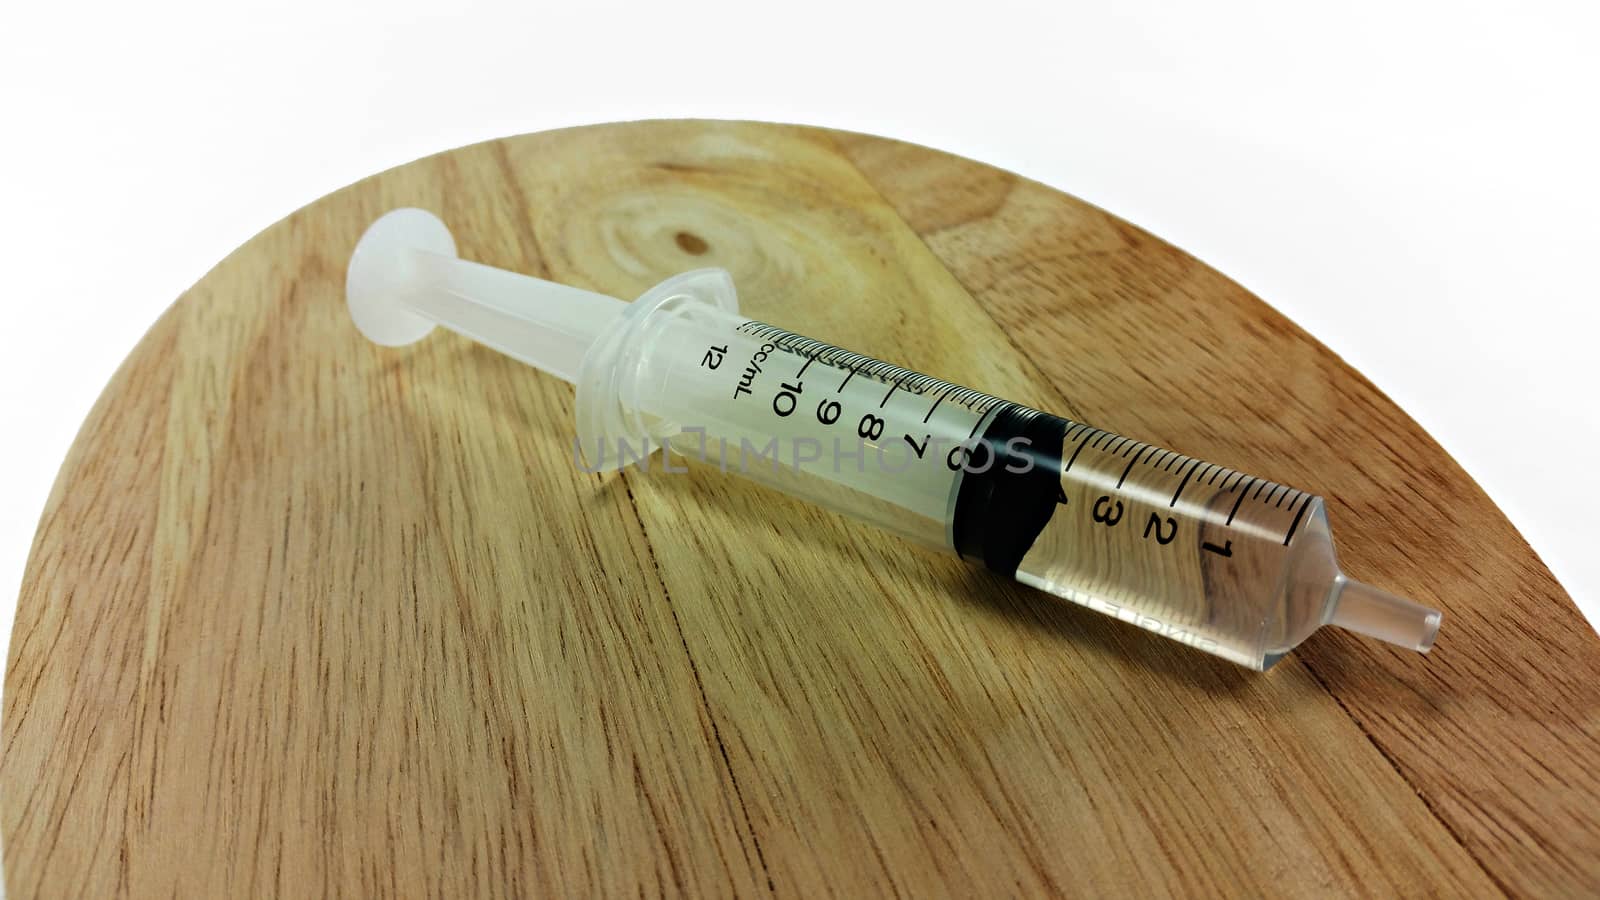 syringe filled with 5cc liquid on wooden plate